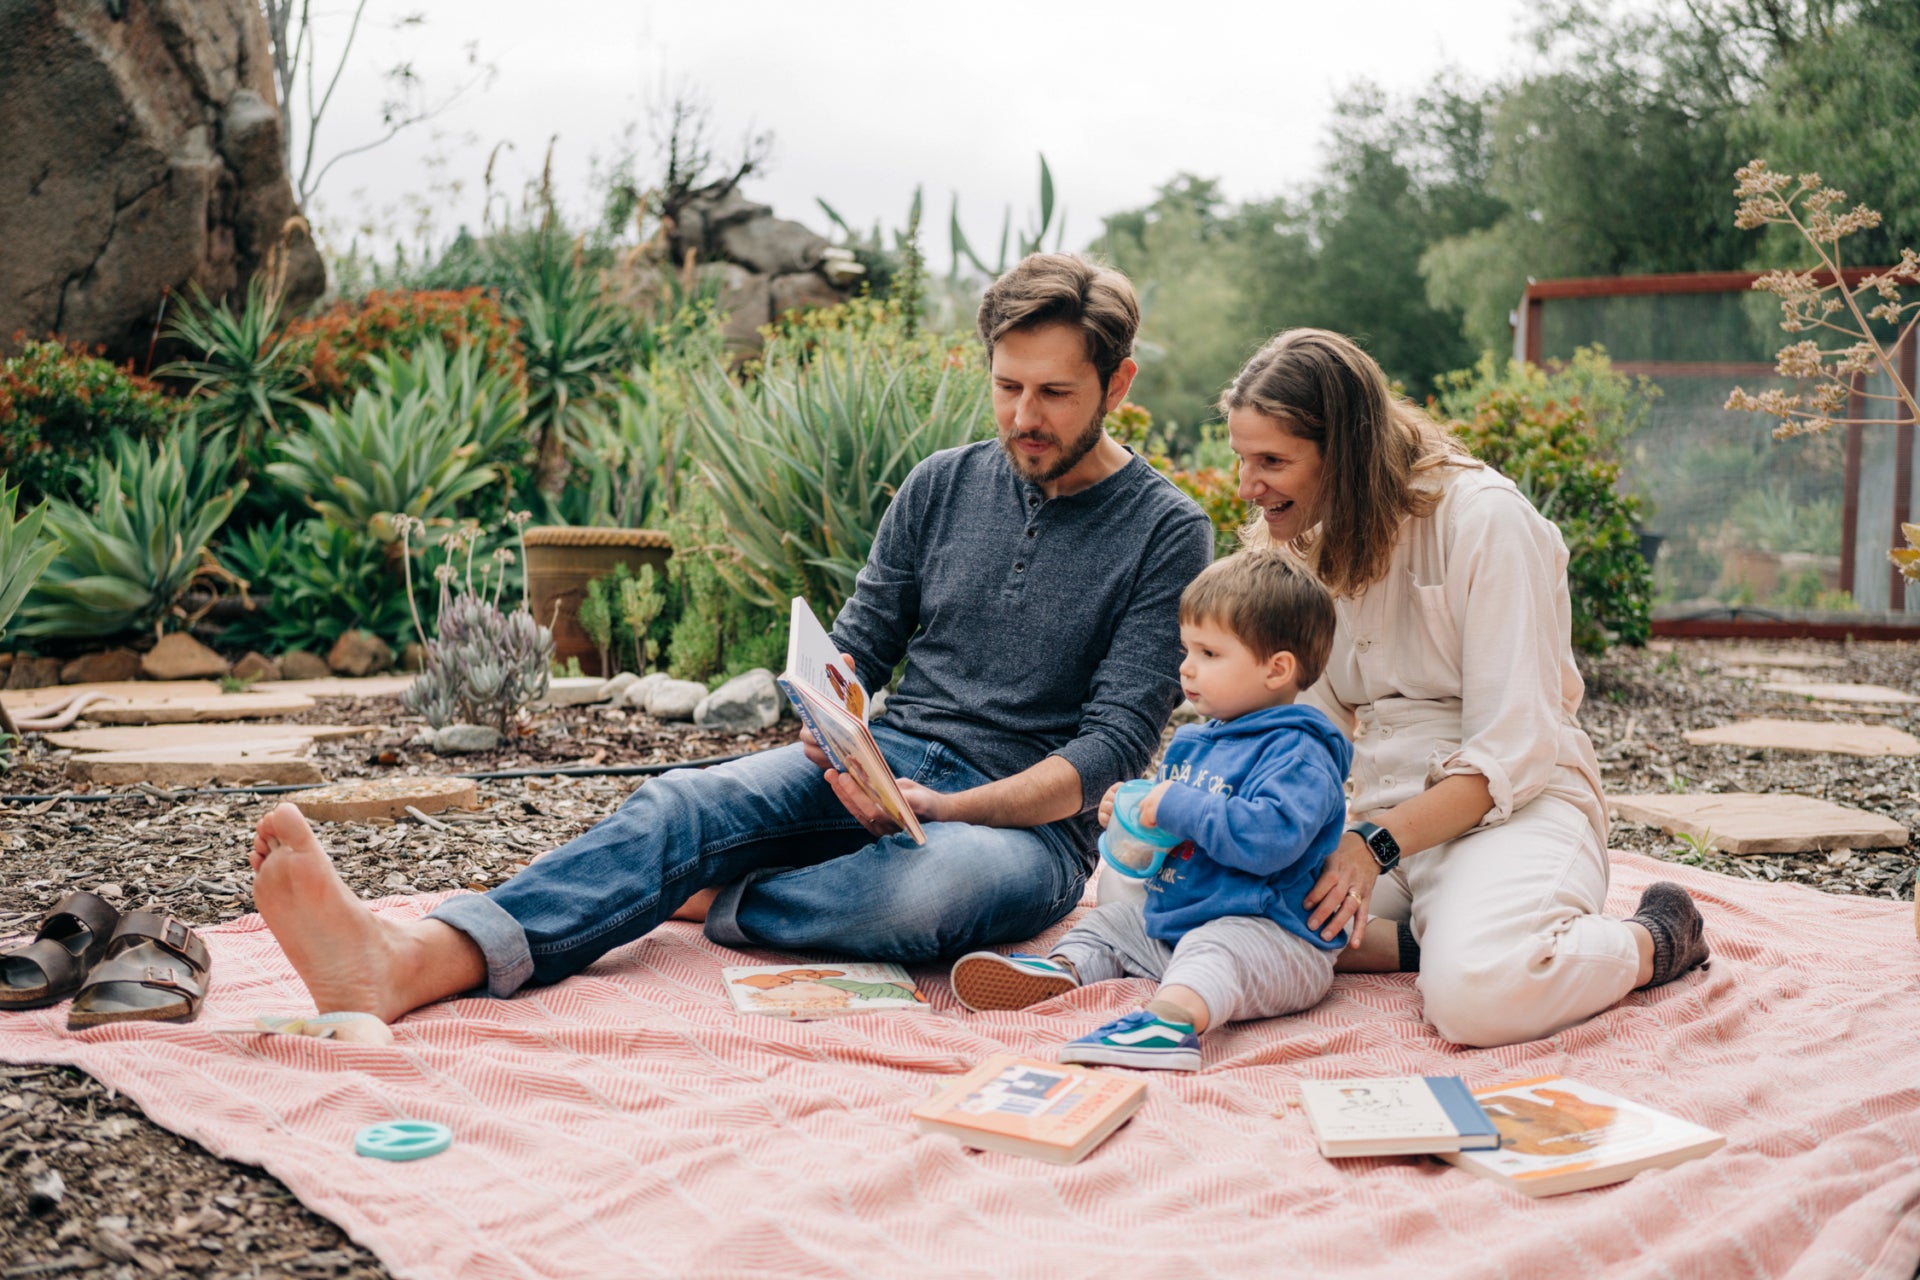 The best seat in the house for story time. Ian, Erna and their son Marty sit buried in books in their backyard.